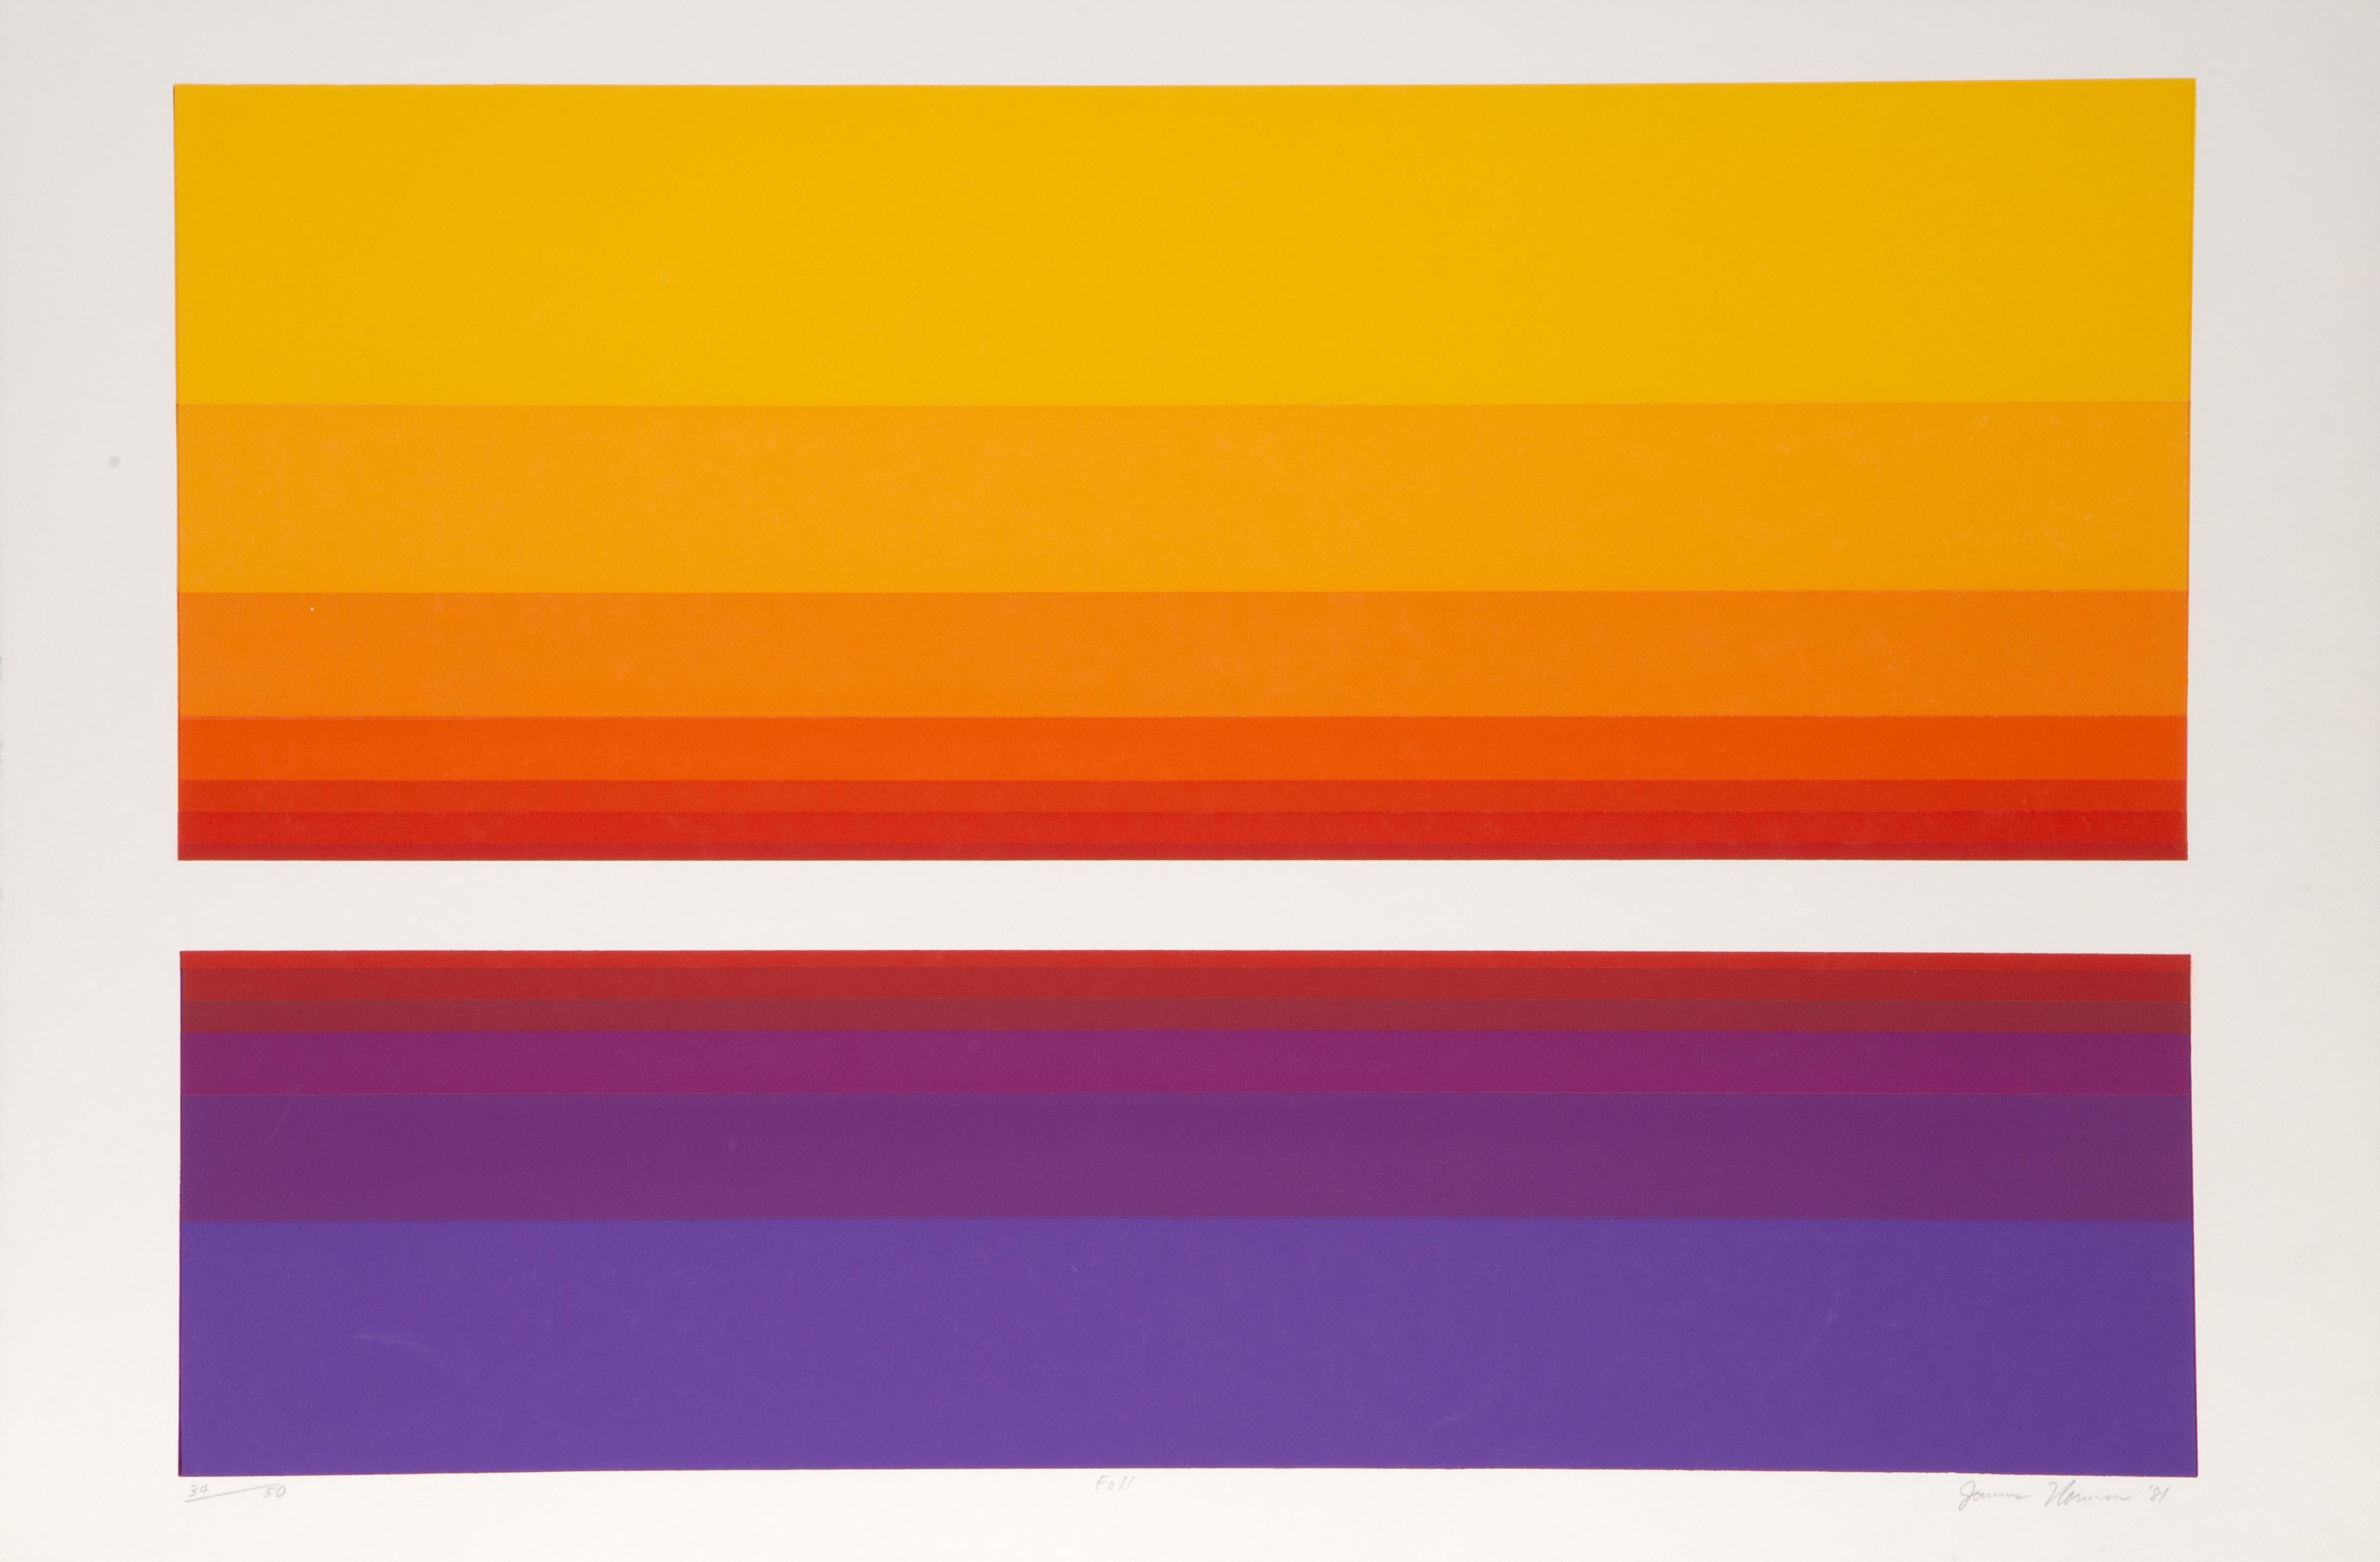 Artist: James Norman, American (1927 - 2011)
Title: Fall
Year: 1981
Medium: Screenprint, signed and numbered in pencil
Edition: 34/50
Image Size: 22 x 32 inches
Size: 25 x 38 in. (63.5 x 96.52 cm)